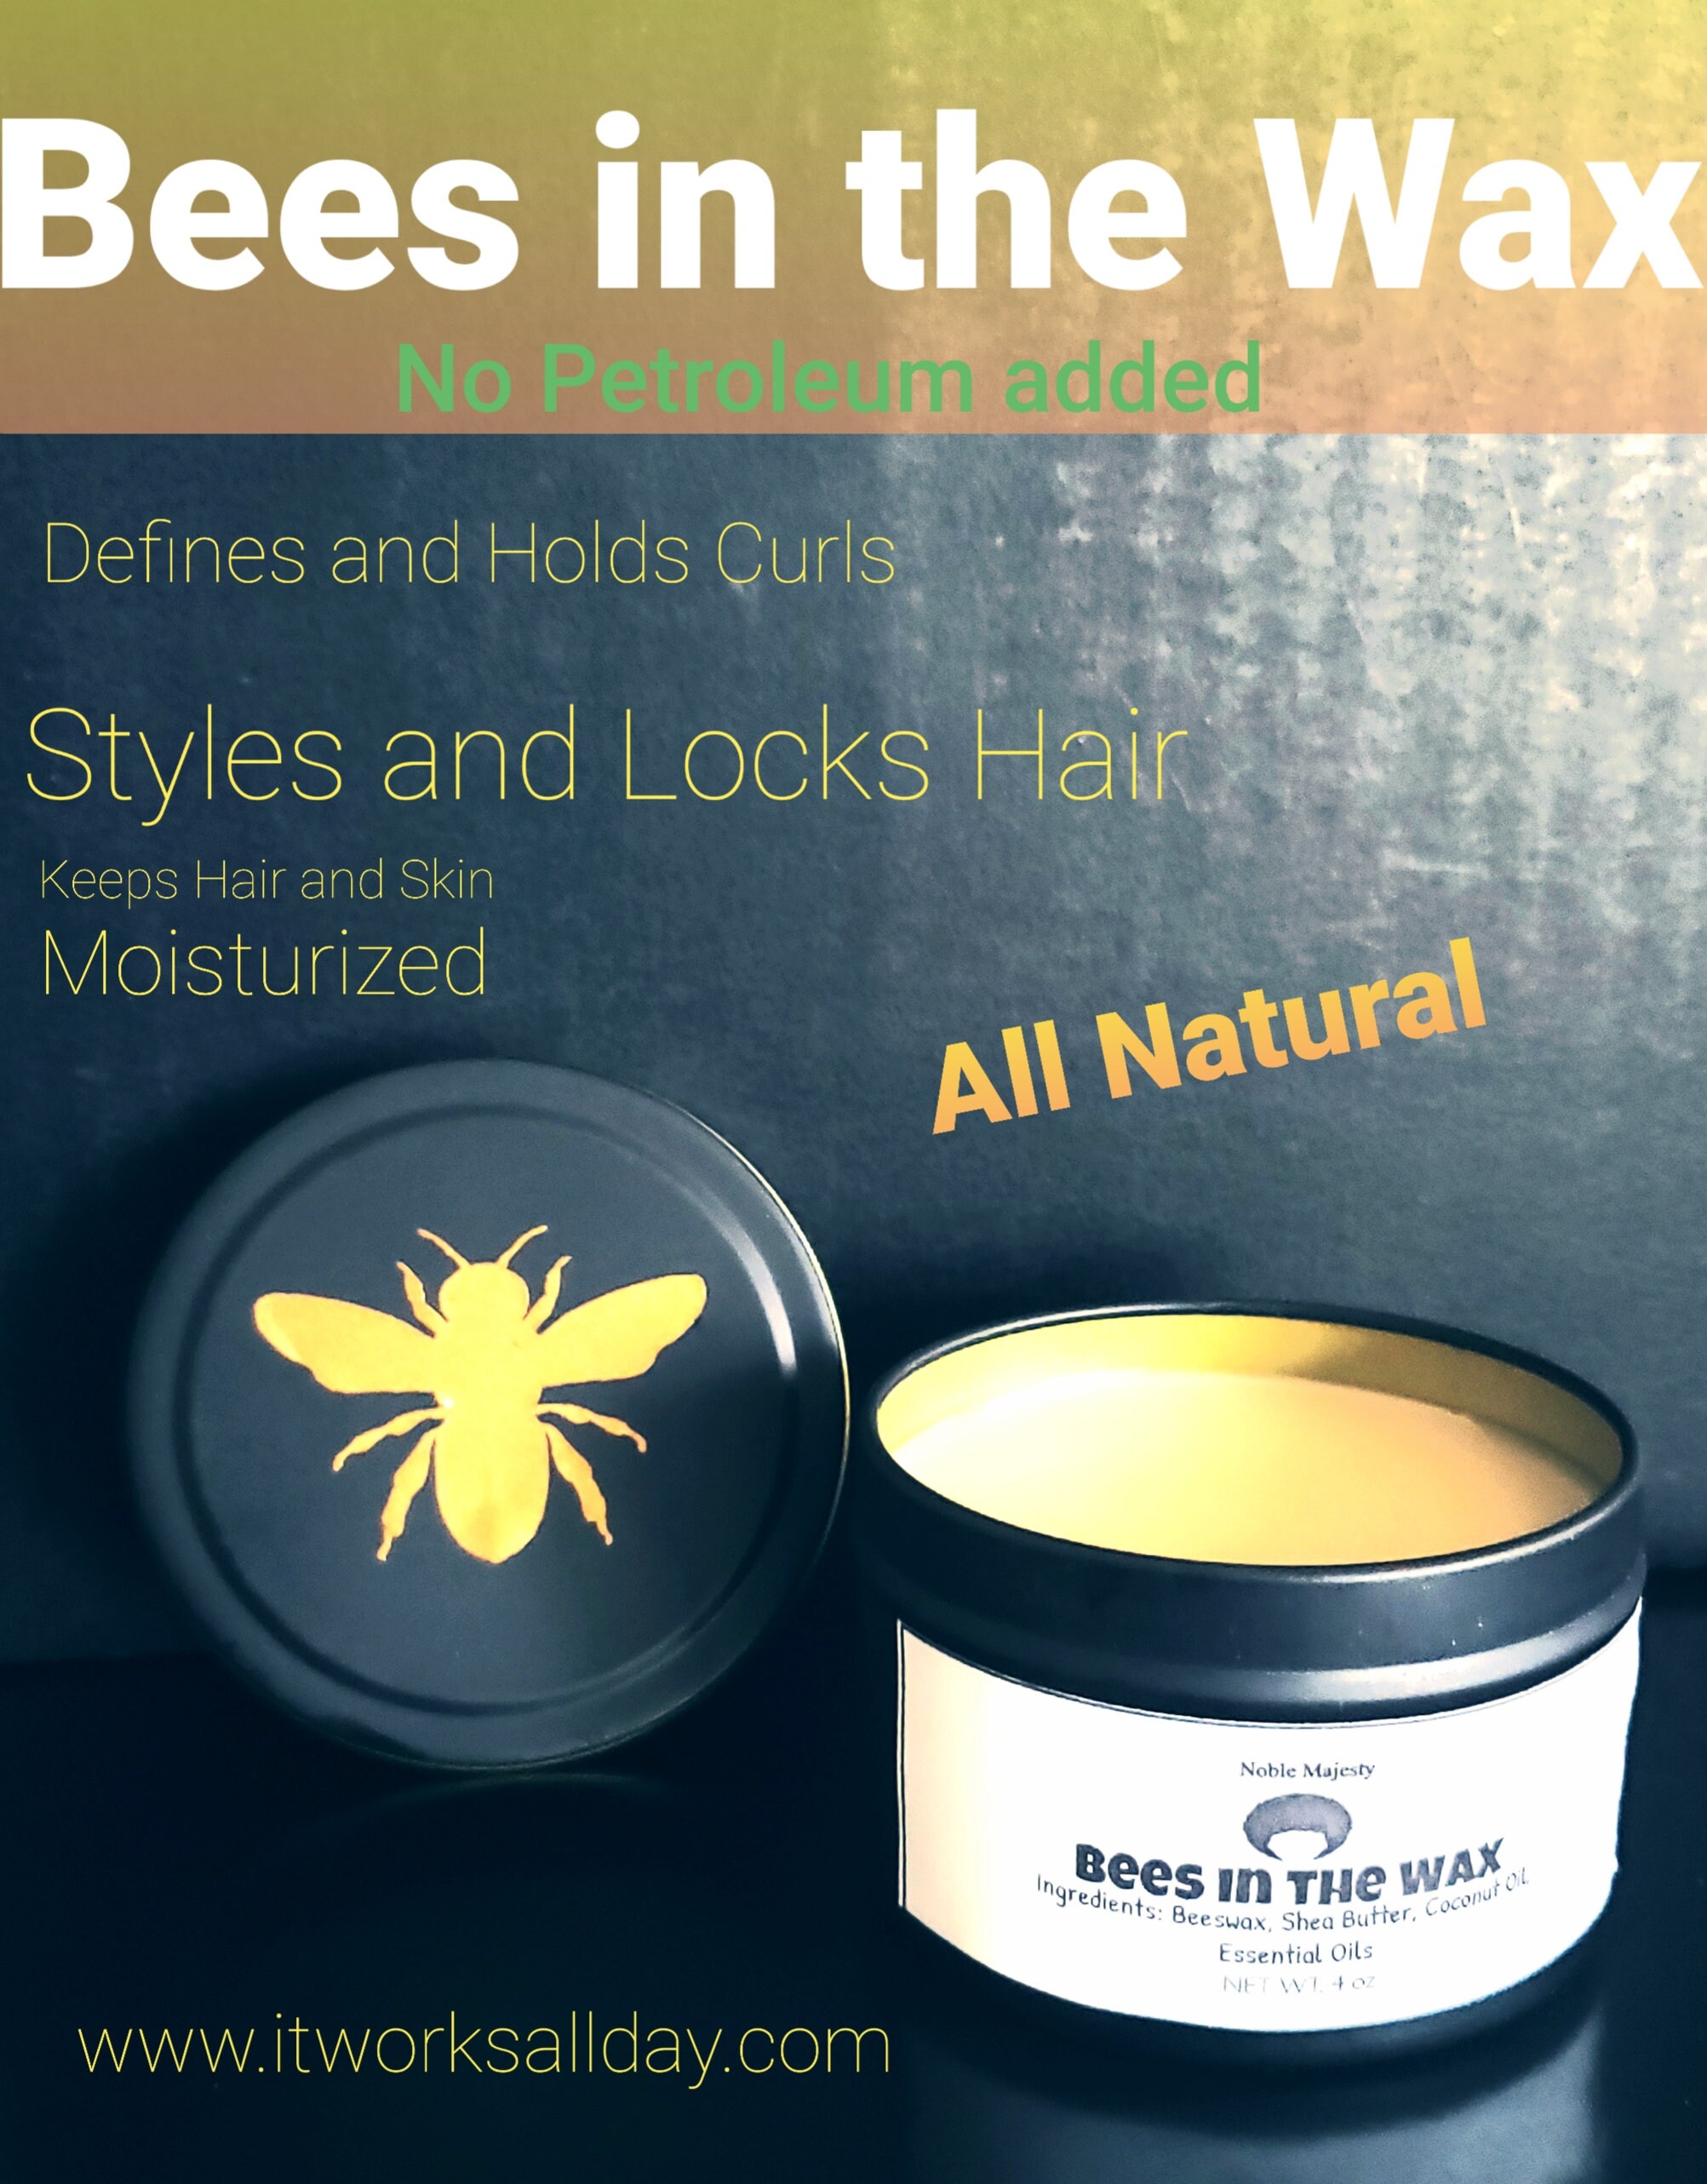 Bees in the Wax for Hair & Skin - Etsy